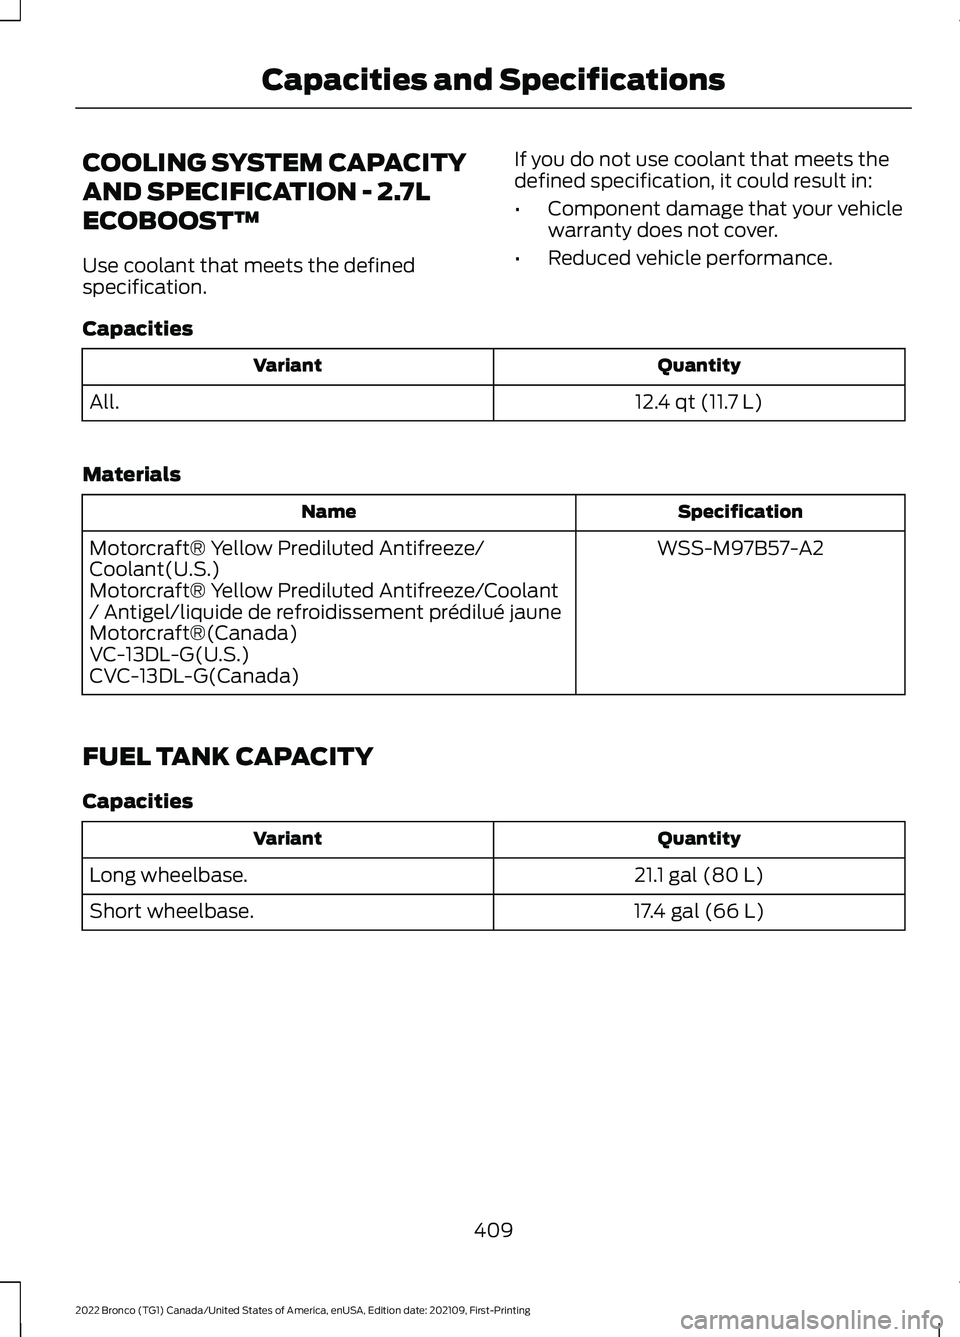 FORD BRONCO 2022  Owners Manual COOLING SYSTEM CAPACITY
AND SPECIFICATION - 2.7L
ECOBOOST™
Use coolant that meets the definedspecification.
If you do not use coolant that meets thedefined specification, it could result in:
•Comp